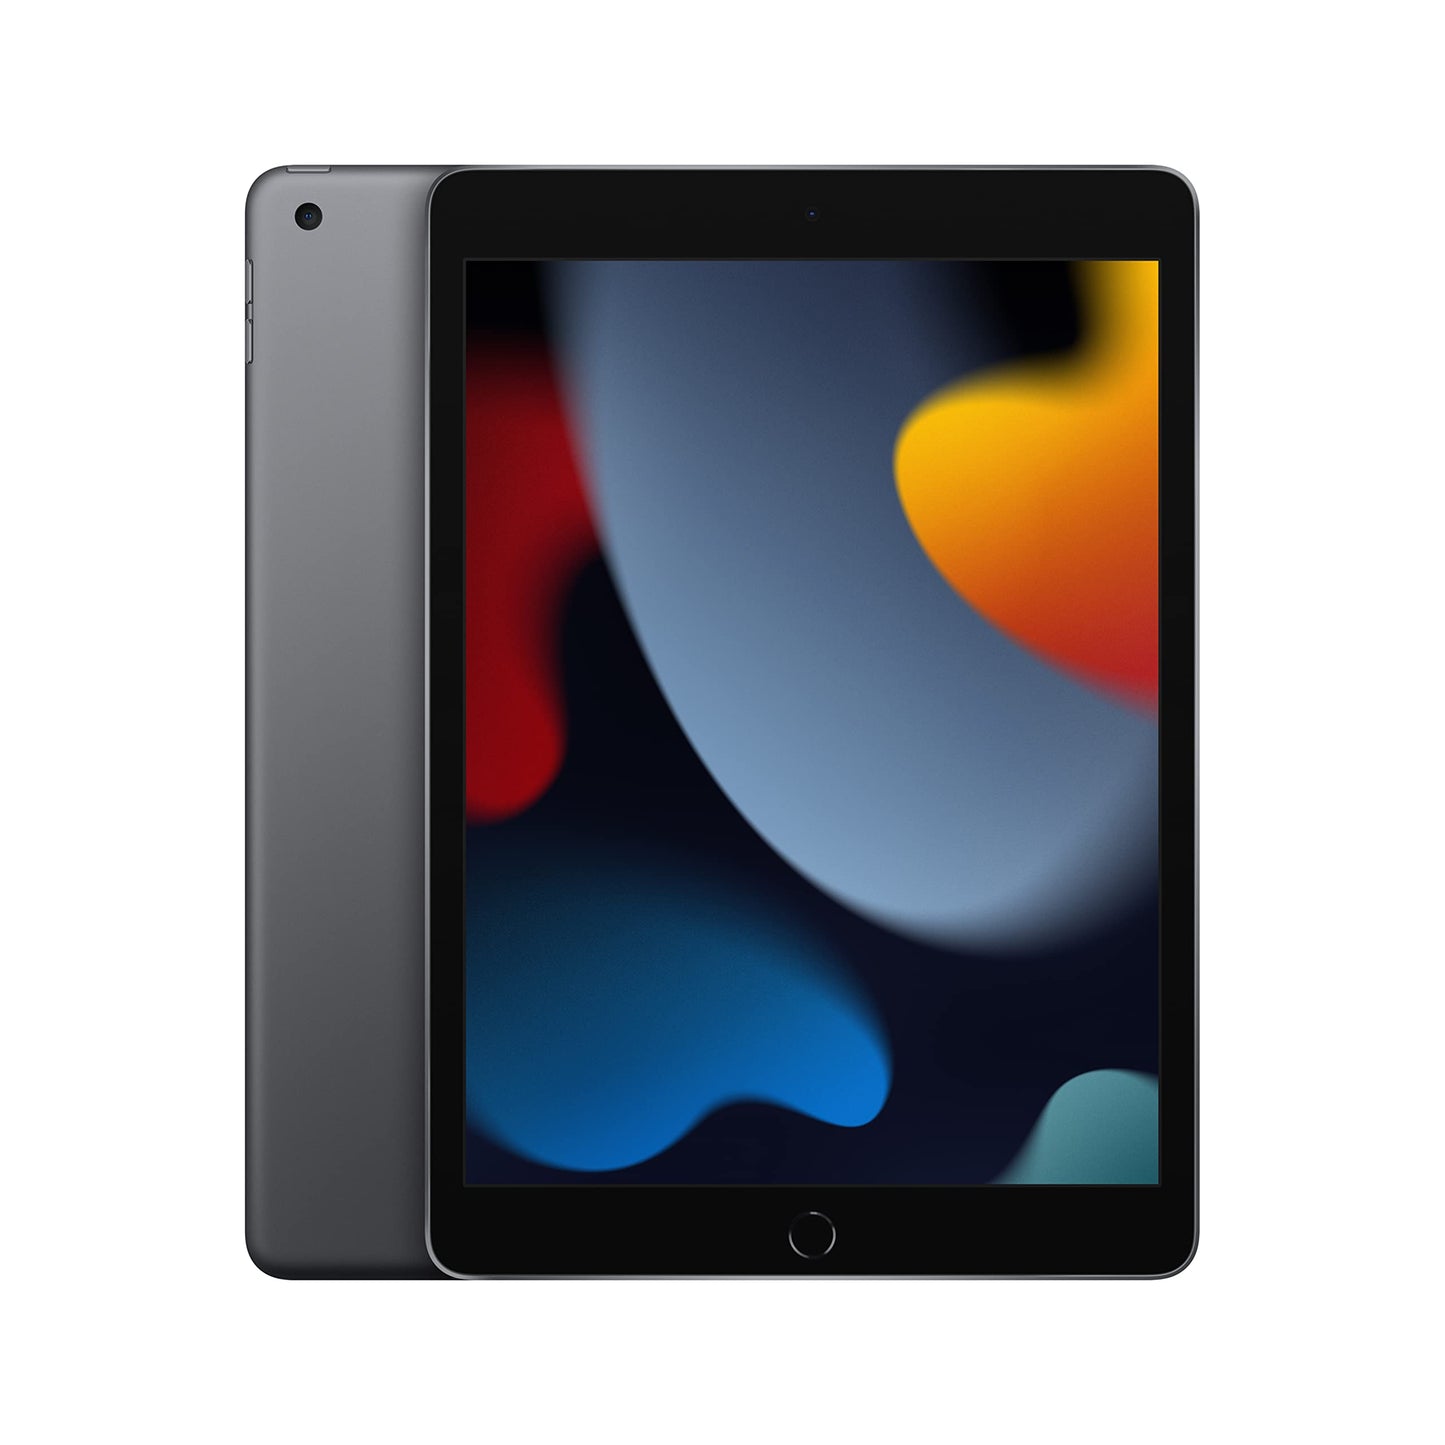 Apple iPad (9th Generation): with A13 Bionic chip, 10.2-inch Retina Display, 256GB, Wi-Fi, 12MP front/8MP Back Camera, Touch ID, All-Day Battery Life – Space Gray